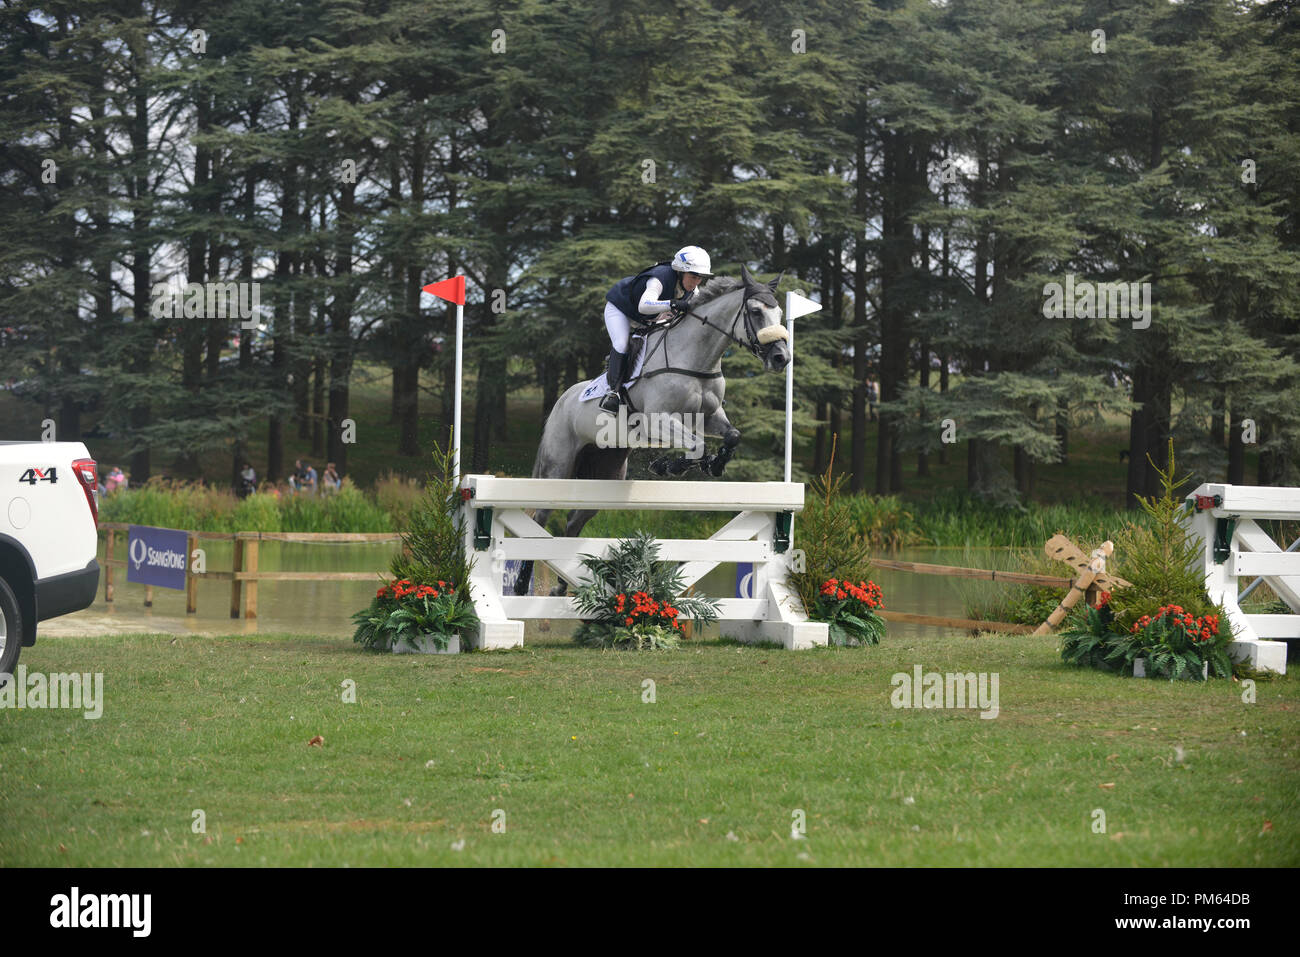 Samantha Hobbs on Tresoke, cross country phase of the CCI*** competition, Blenheim Palace Horse Trials 2018, Blenheim Palace, Woodstock, Oxfordshire Stock Photo